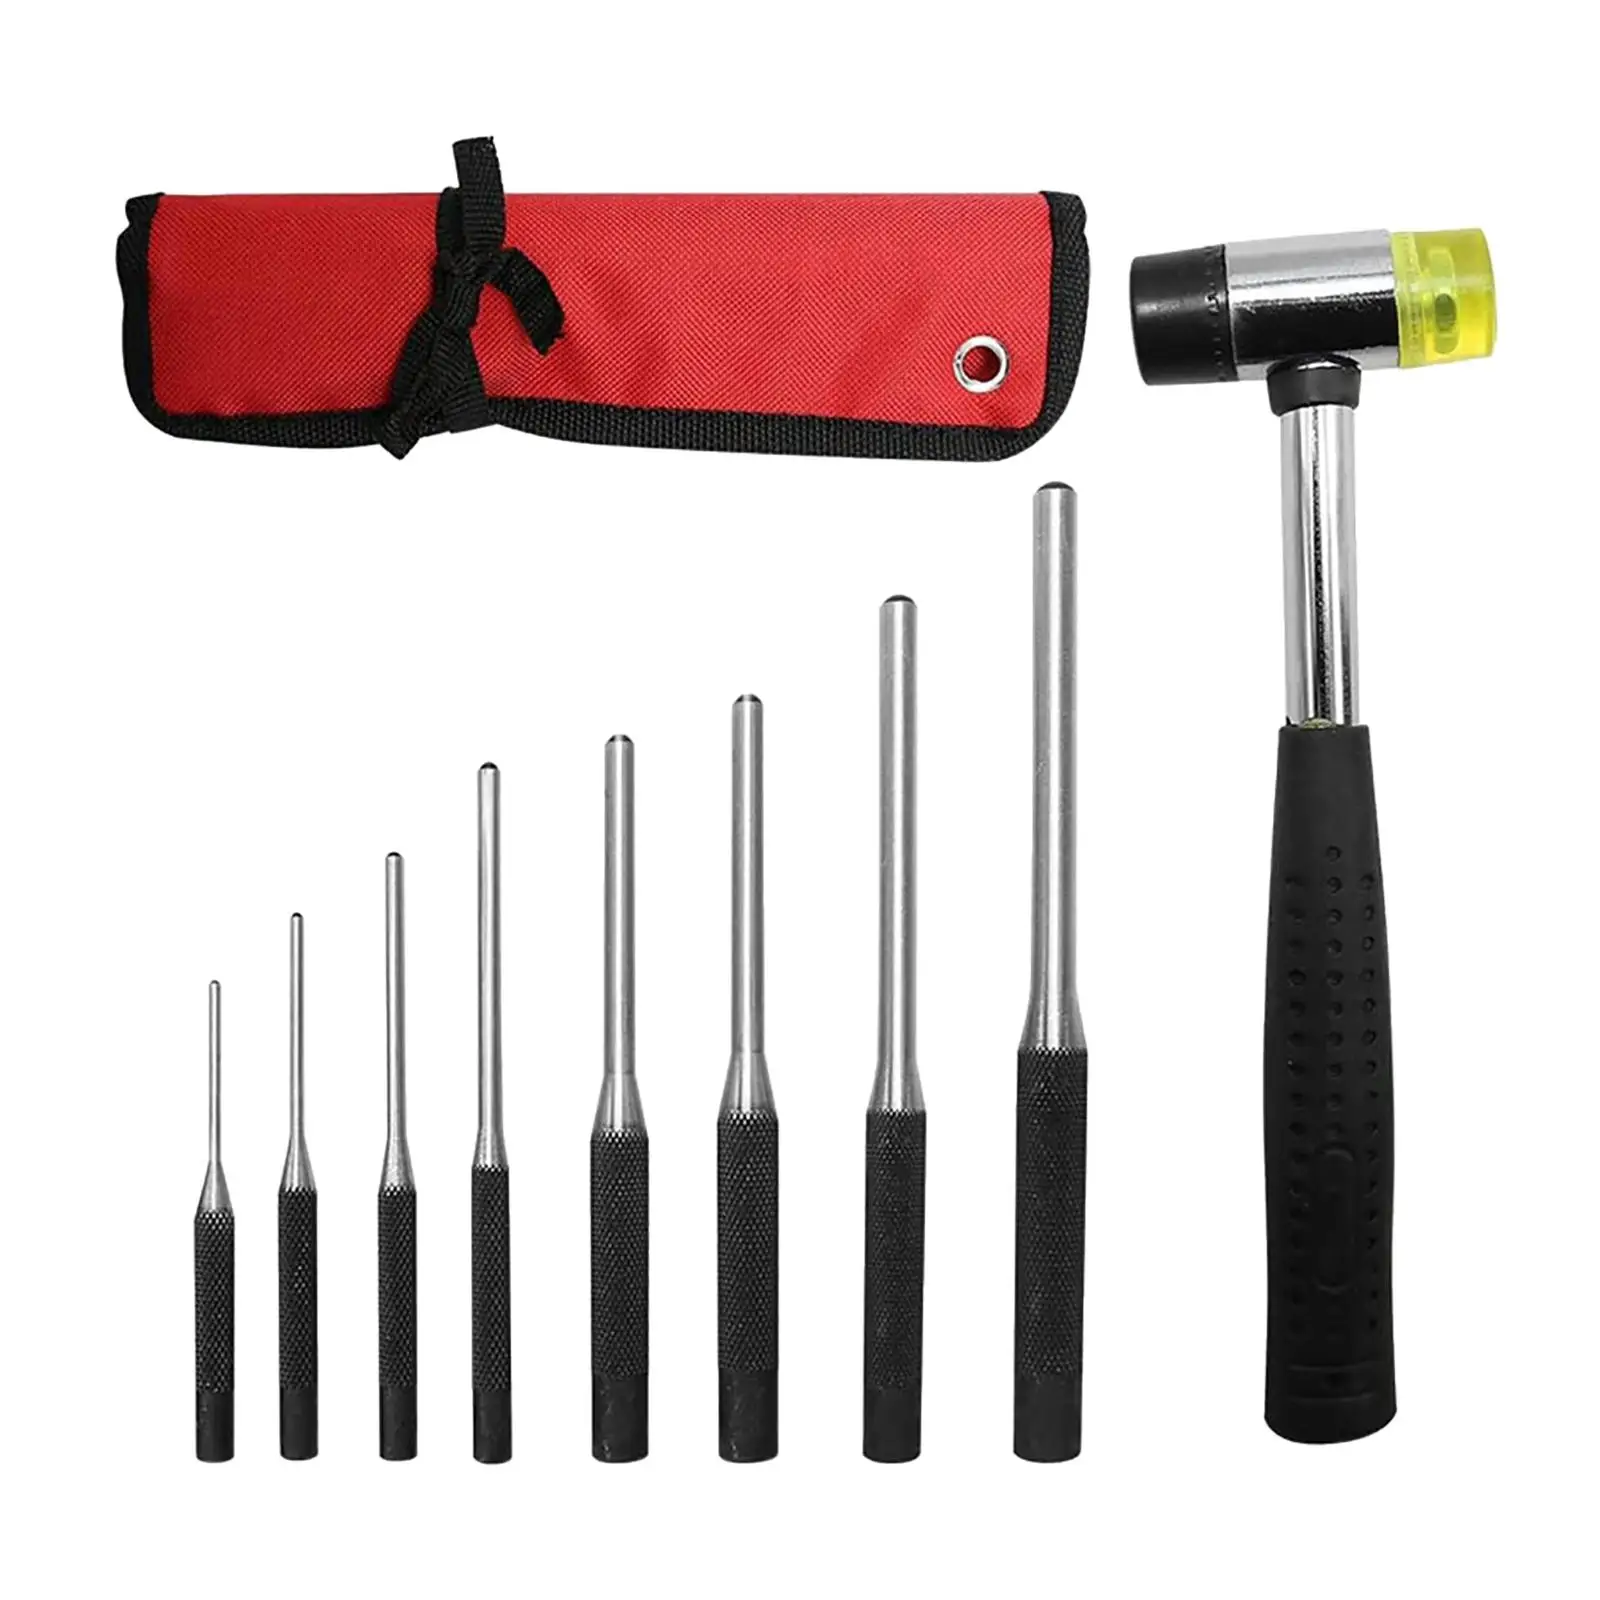 Roll Pin Punch Set with Storage Pouch, 9Pcs Steel Removal Tool Kit with Carrying Bag for Jewelers, Watch Repairers, Work, Retail